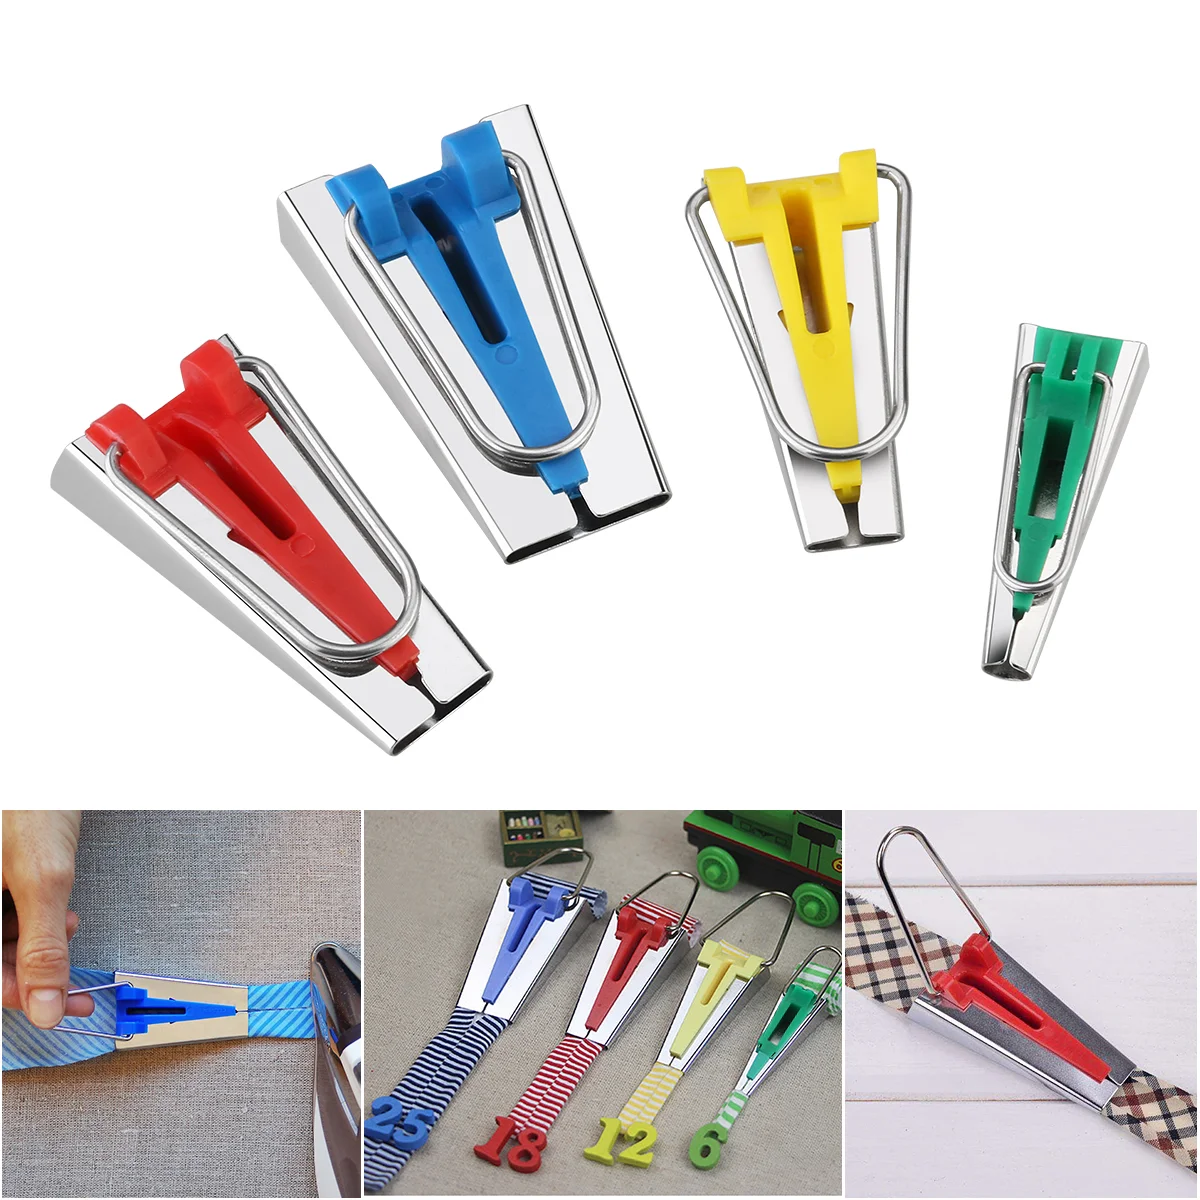 

4 Sizes 6mm 12mm 18mm 25mm Portable Useful Binding Tools Fabric Bias Tape Makers Sewing Quilting Tools for Sartorius